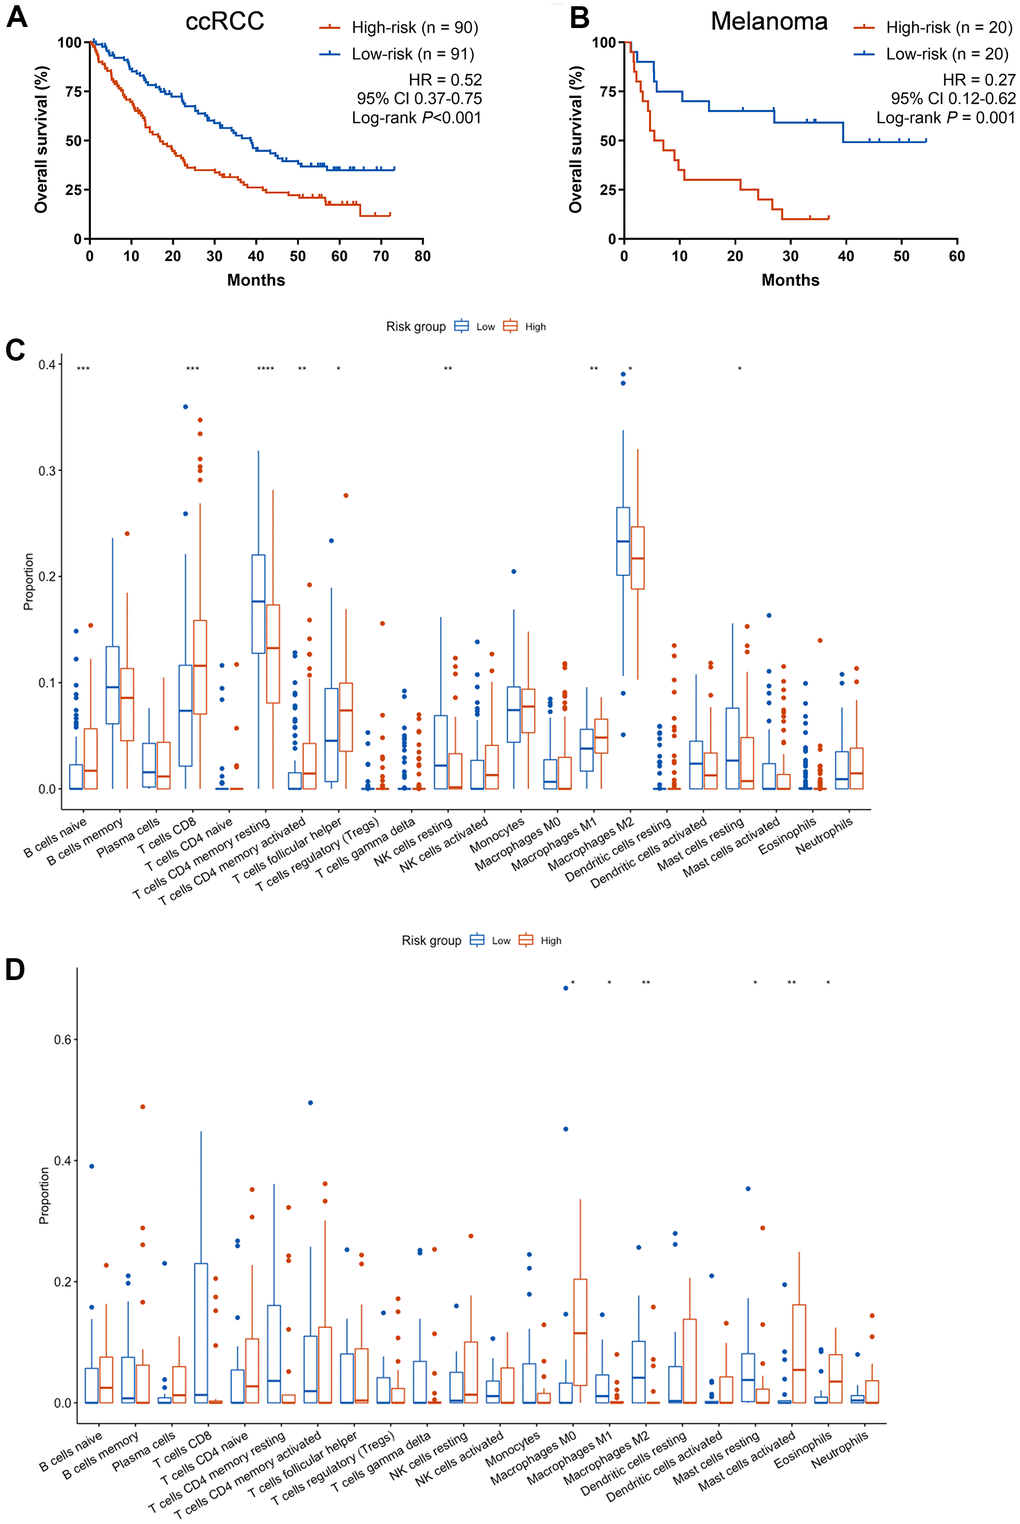 Exploratory analysis of the CCCP risk score in ccRCC and melanoma cohort. (A, B) Kaplan-Meier curves of OS comparing patients with high- and low-risk in the ccRCC cohort (A) and melanoma cohort (B) treated with ICIs. (C) Comparison of immune cell infiltrations between patients with high- and low- risk score in melanoma cohort. (D) Comparison of immune cell infiltrations between patients with high- and low- risk score in ccRCC cohort. CCCP, complement and coagulation cascades pathway; ccRCC, clear cell renal cell carcinoma; Tfh, T follicular helper cells.